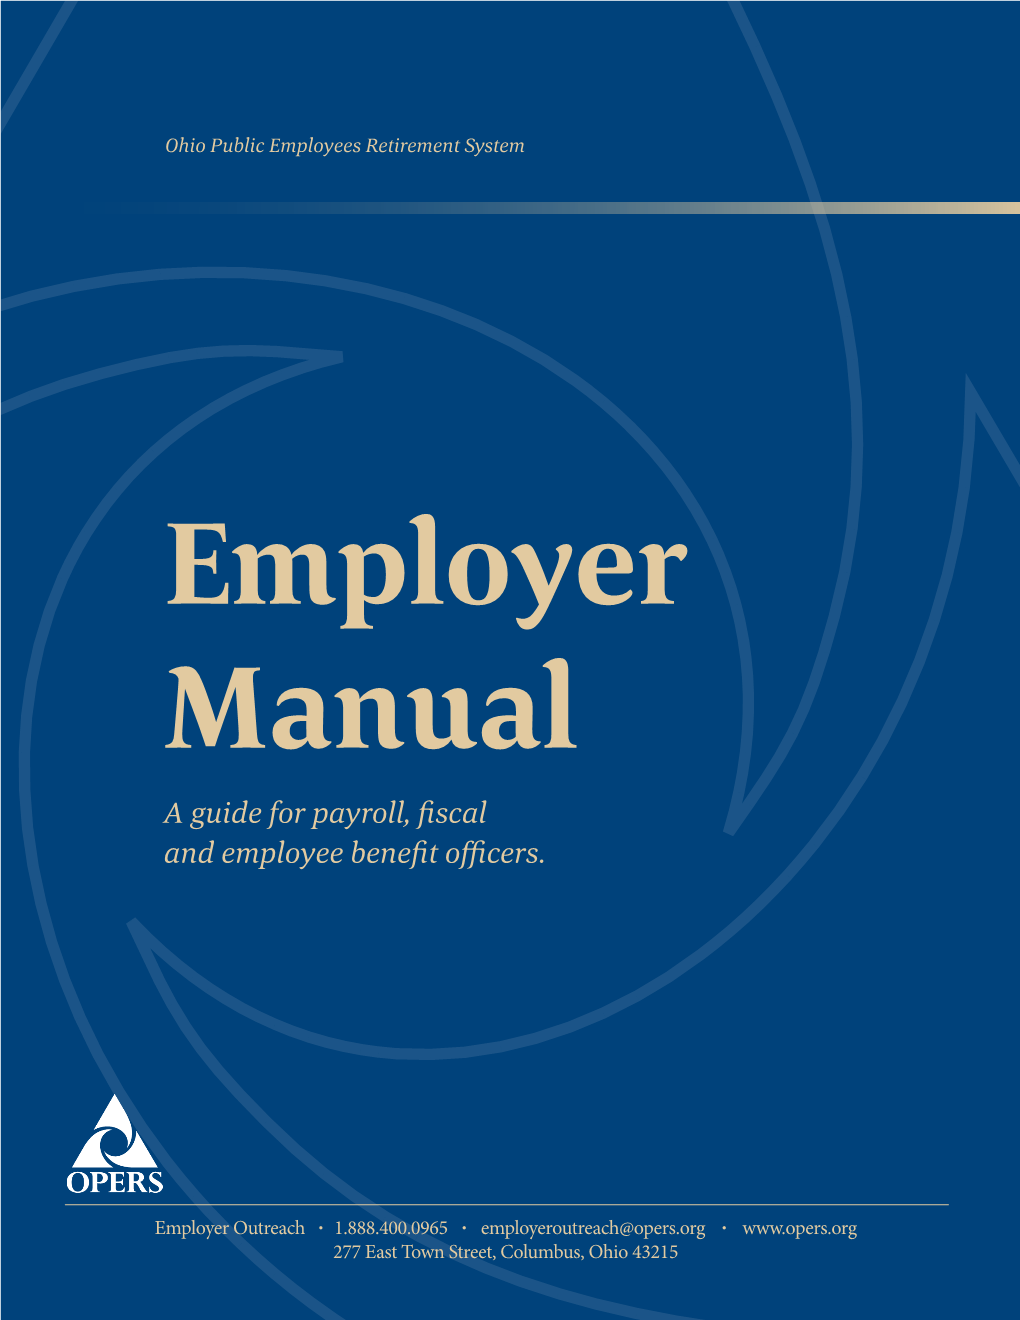 A Guide for Payroll, Fiscal and Employee Benefit Officers